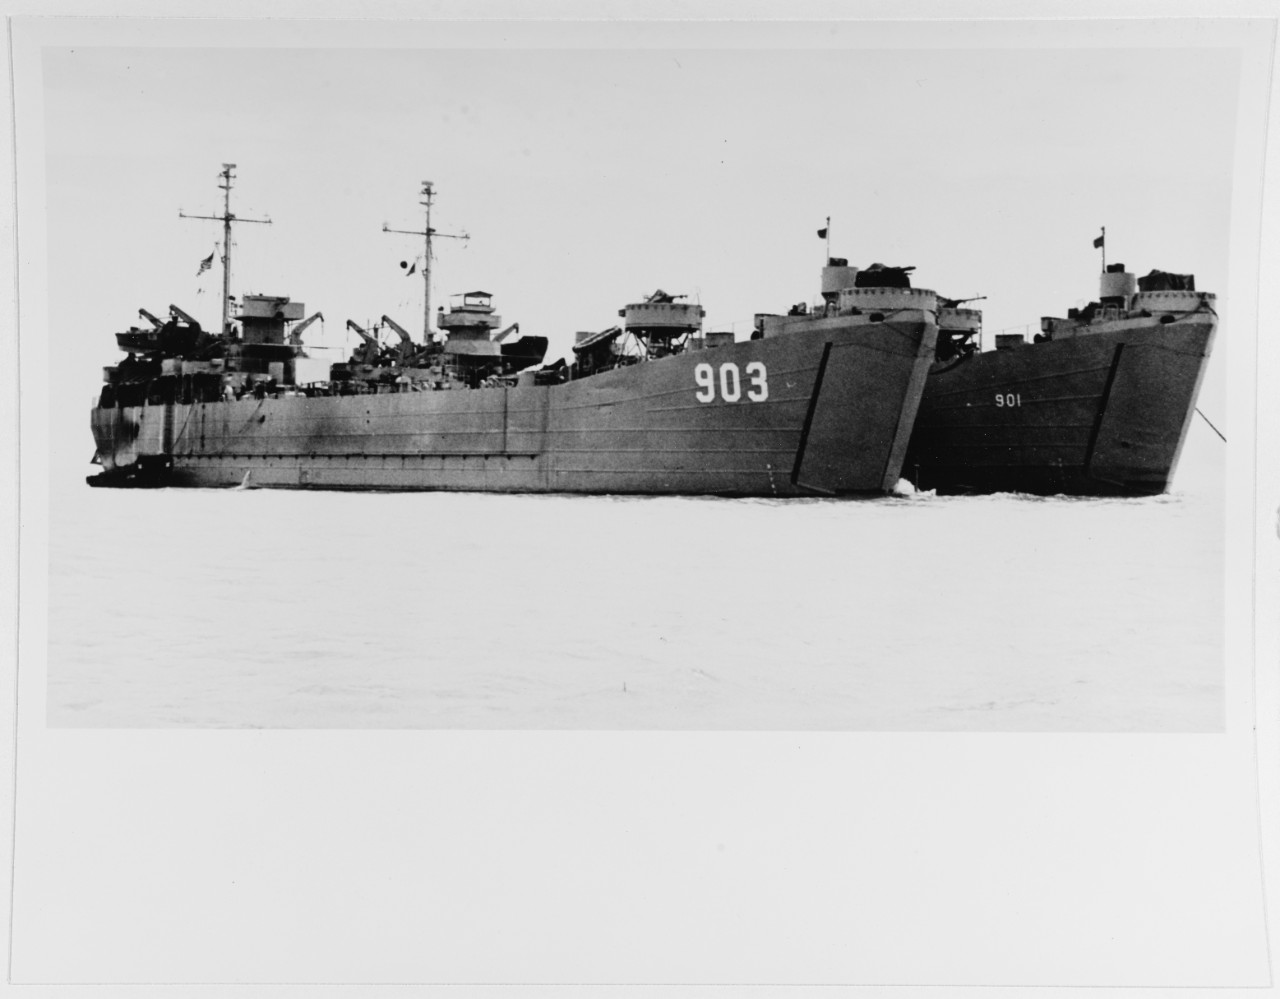 USS LST-903 (later: LYMAN COUNTY) and USS LST - 901 (later: LITCHFIELD COUNTY)